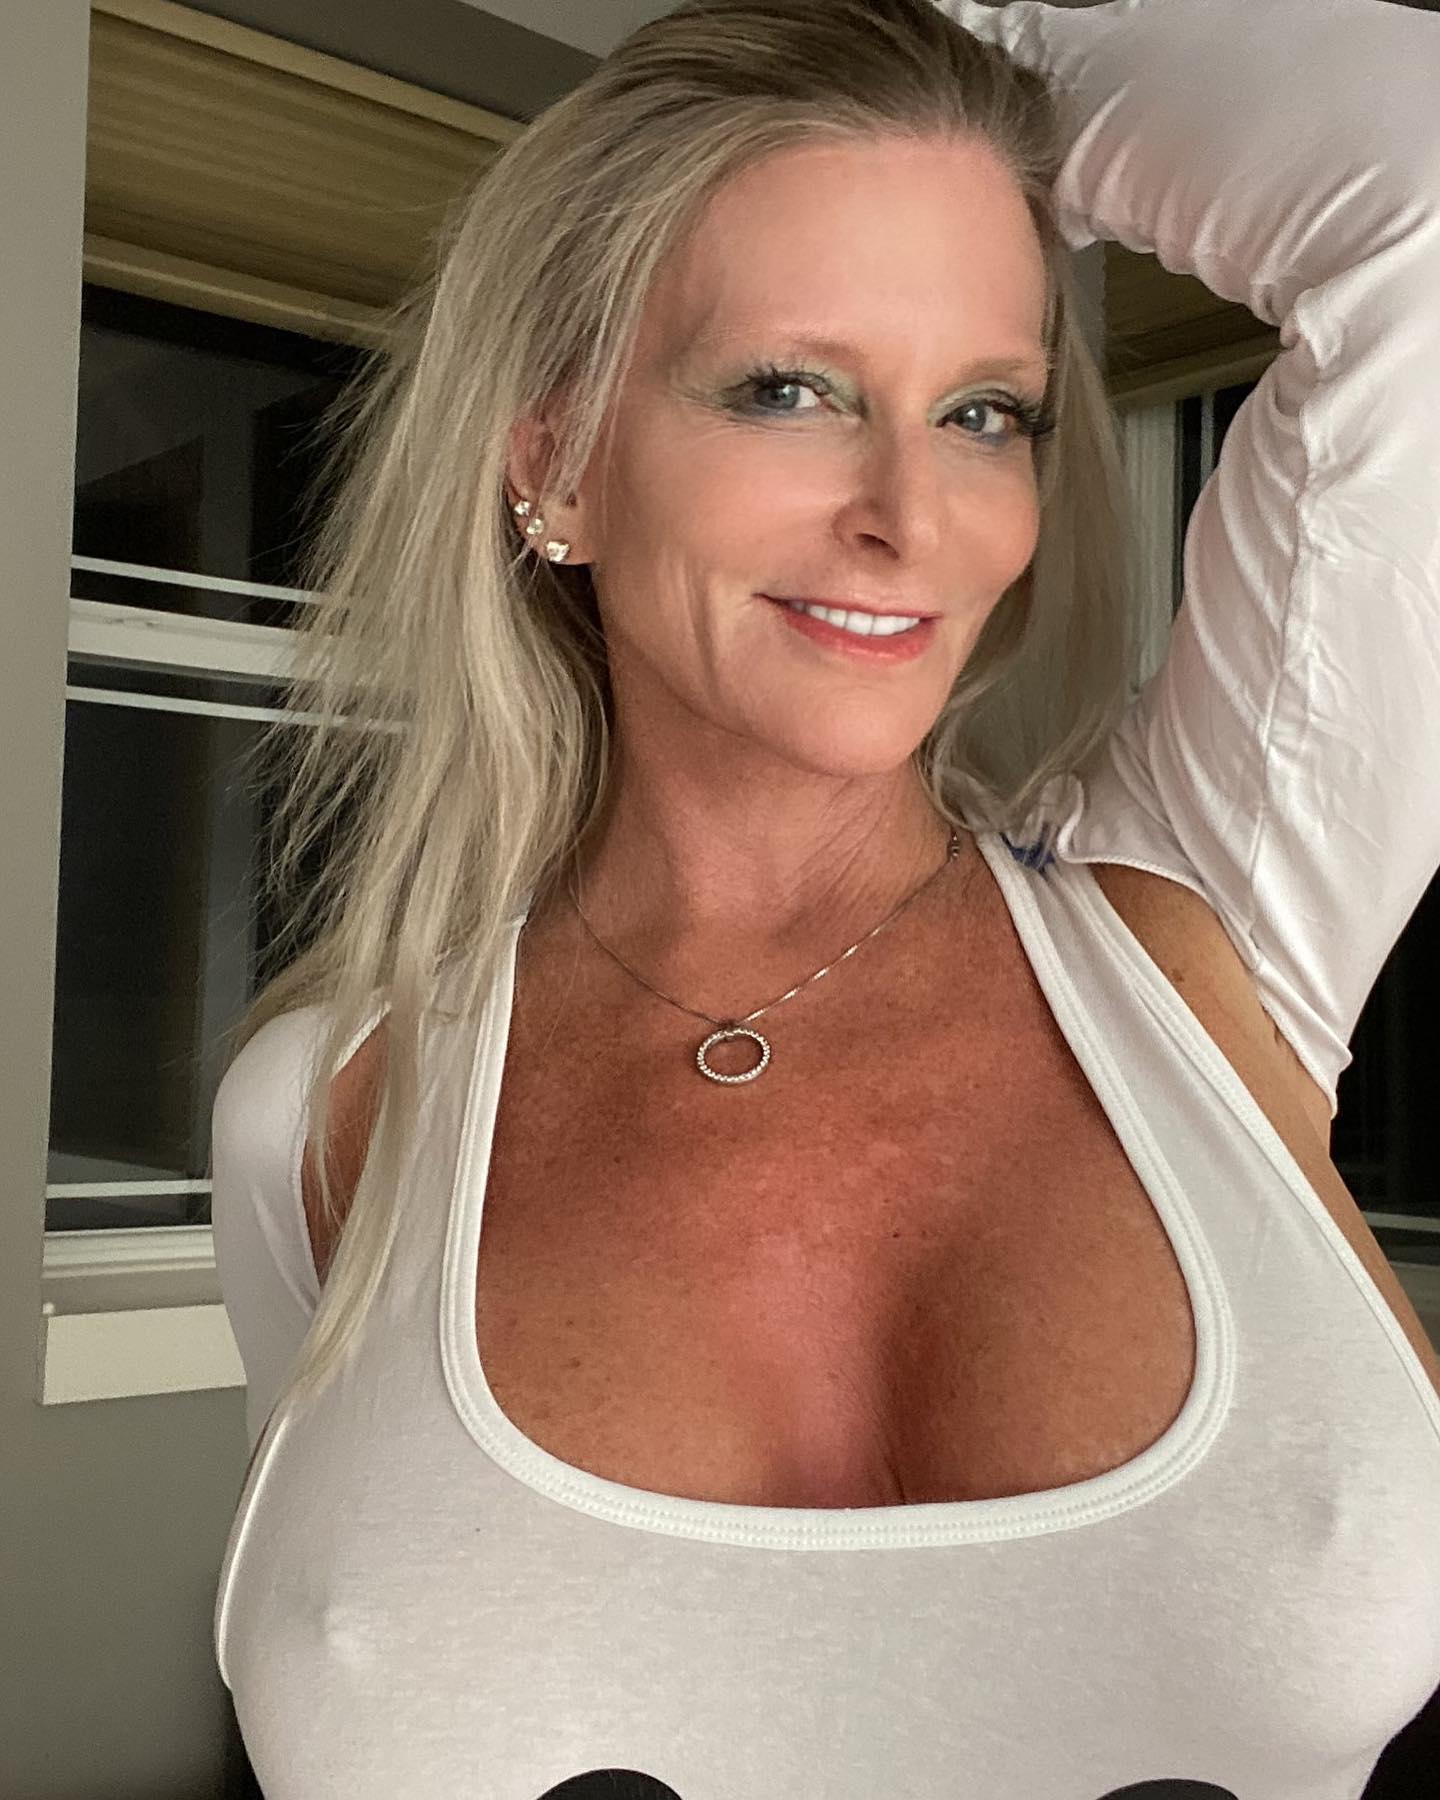 TW Pornstars Amateur Milfs Twitter If You Guys Want To See My